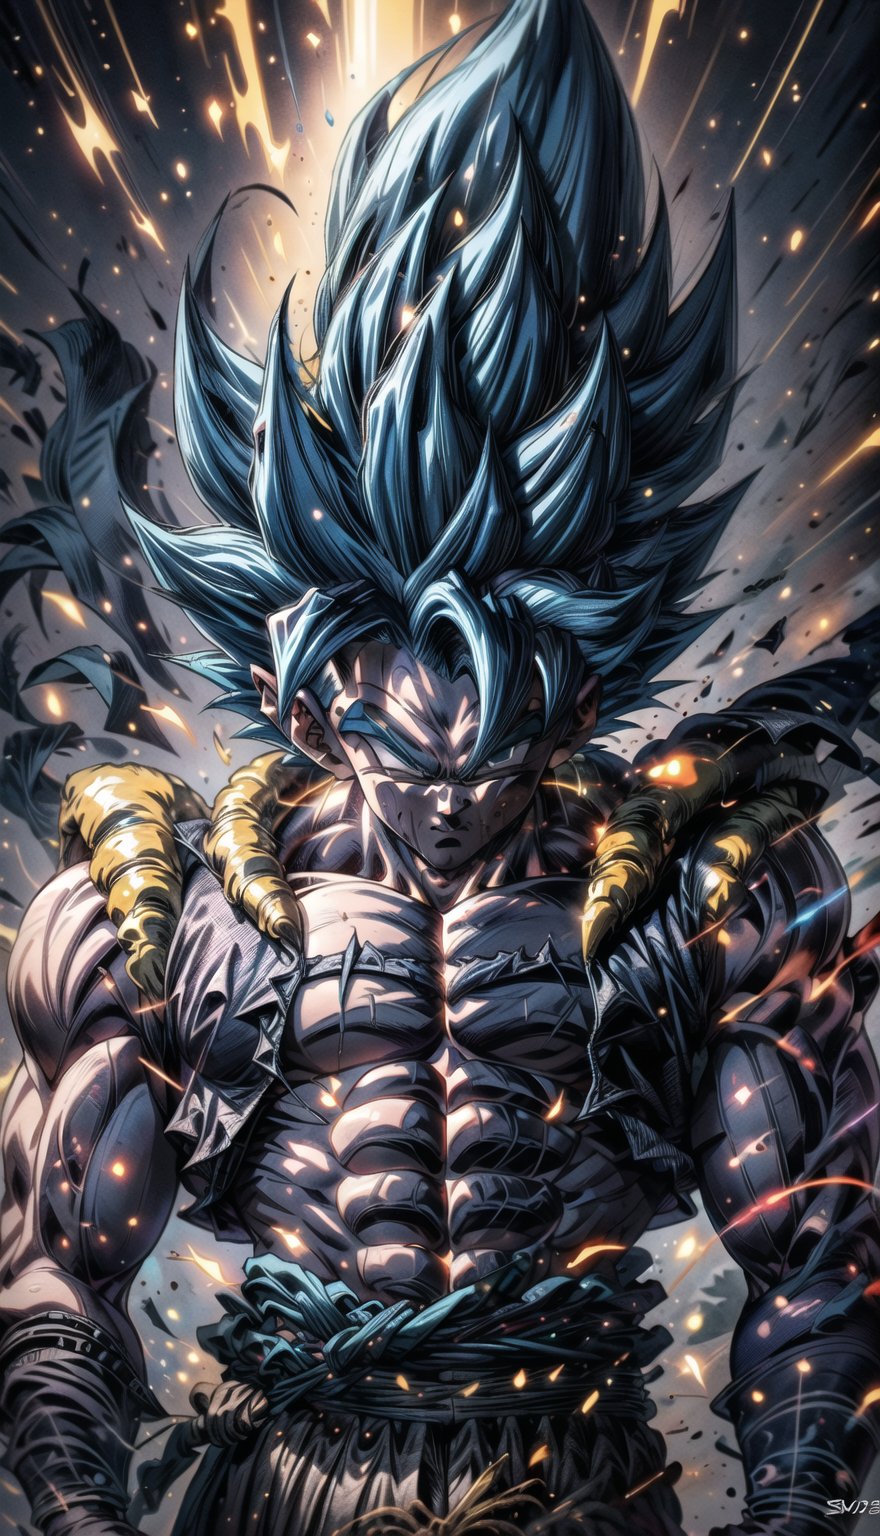 We can visualize the iconic character from the animated series Dragon Ball Z, Gogeta, in his super saiyan Blue transformation. (his extremely long, loose, blue hair:1.9). (very very long hair:1.9). (blue eyebrows, eyebrow blue:1.9). Blue eyes, with his characteristic suit. Flashes of light and electricity surround his entire body, a Blue glow. smiling, smug. His ki is immense and mystical. His look is wild. He is at the culmination of a great battle for the fate of planet Earth and you can see his wounded body. The image quality and details have to be worthy of one of the most famous characters in all of anime history and honor him as he deserves. which reflects the design style and details of the great Akira Toriyama. 



PNG image format, sharp lines and borders, solid blocks of colors, over 300ppp dots per inch, 32k ultra high definition, 530MP, Fujifilm XT3, cinematographic, (photorealistic:1.6), 4D, High definition RAW color professional photos, photo, masterpiece, realistic, ProRAW, realism, photorealism, high contrast, digital art trending on Artstation ultra high definition detailed realistic, detailed, skin texture, hyper detailed, realistic skin texture, facial features, armature, best quality, ultra high res, high resolution, detailed, raw photo, sharp re, lens rich colors hyper realistic lifelike texture dramatic lighting unrealengine trending, ultra sharp, pictorial technique, (sharpness, definition and photographic precision), (contrast, depth and harmonious light details), (features, proportions, colors and textures at their highest degree of realism), (blur background, clean and uncluttered visual aesthetics, sense of depth and dimension, professional and polished look of the image), work of beauty and complexity. perfectly symmetrical body.
(aesthetic + beautiful + harmonic:1.5), (ultra detailed face, ultra detailed perfect eyes, ultra detailed mouth, ultra detailed body, ultra detailed perfect hands, ultra detailed clothes, ultra detailed background, ultra detailed scenery:1.5),



detail_master_XL:0.9,SDXLanime:0.8,LineAniRedmondV2-Lineart-LineAniAF:0.8,EpicAnimeDreamscapeXL:0.8,ManimeSDXL:0.8,Midjourney_Style_Special_Edition_0001:0.8,animeoutlineV4_16:0.8,perfect_light_colors:0.8,SAIYA,Super saiyan Blue,yuzu2:0.3,Gogeta_Blue